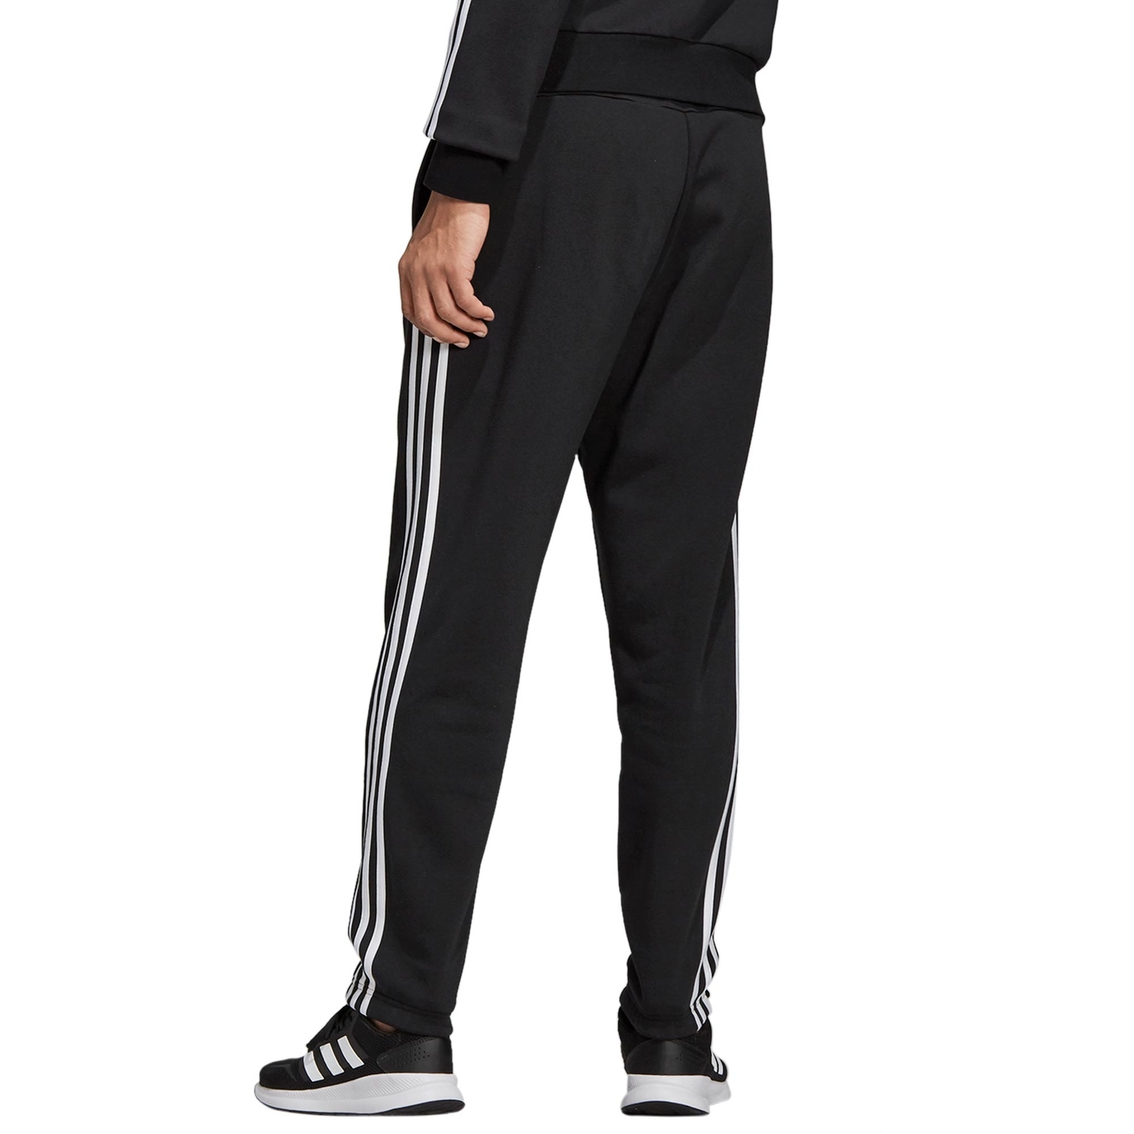 Adidas Essentials 3 Stripe Tapered Pants | Pants | Clothing ...